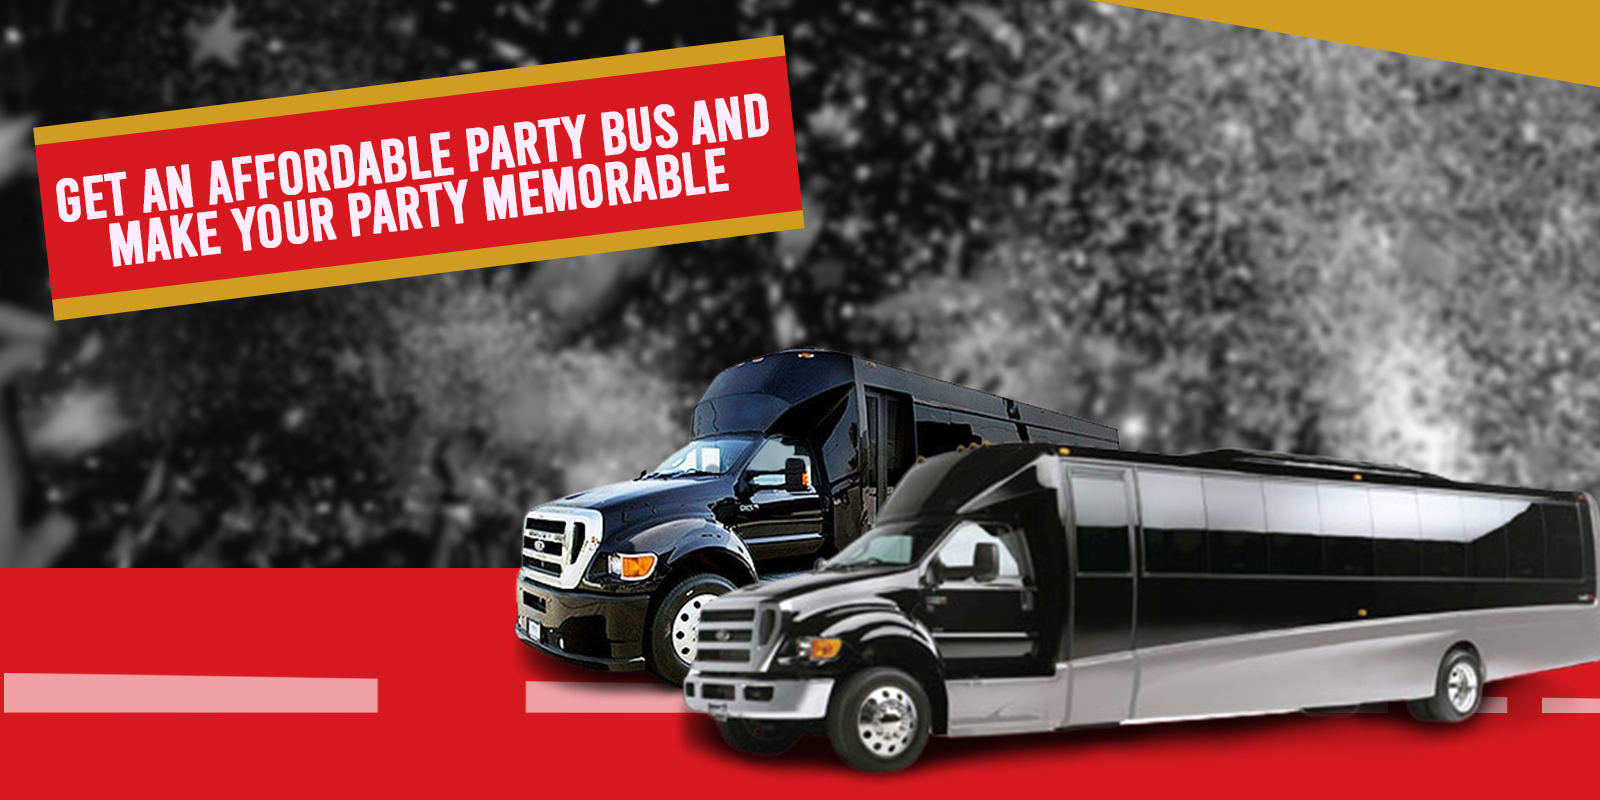 Affordable Party Bus Rentals Is So Famous At JMS, But Why?